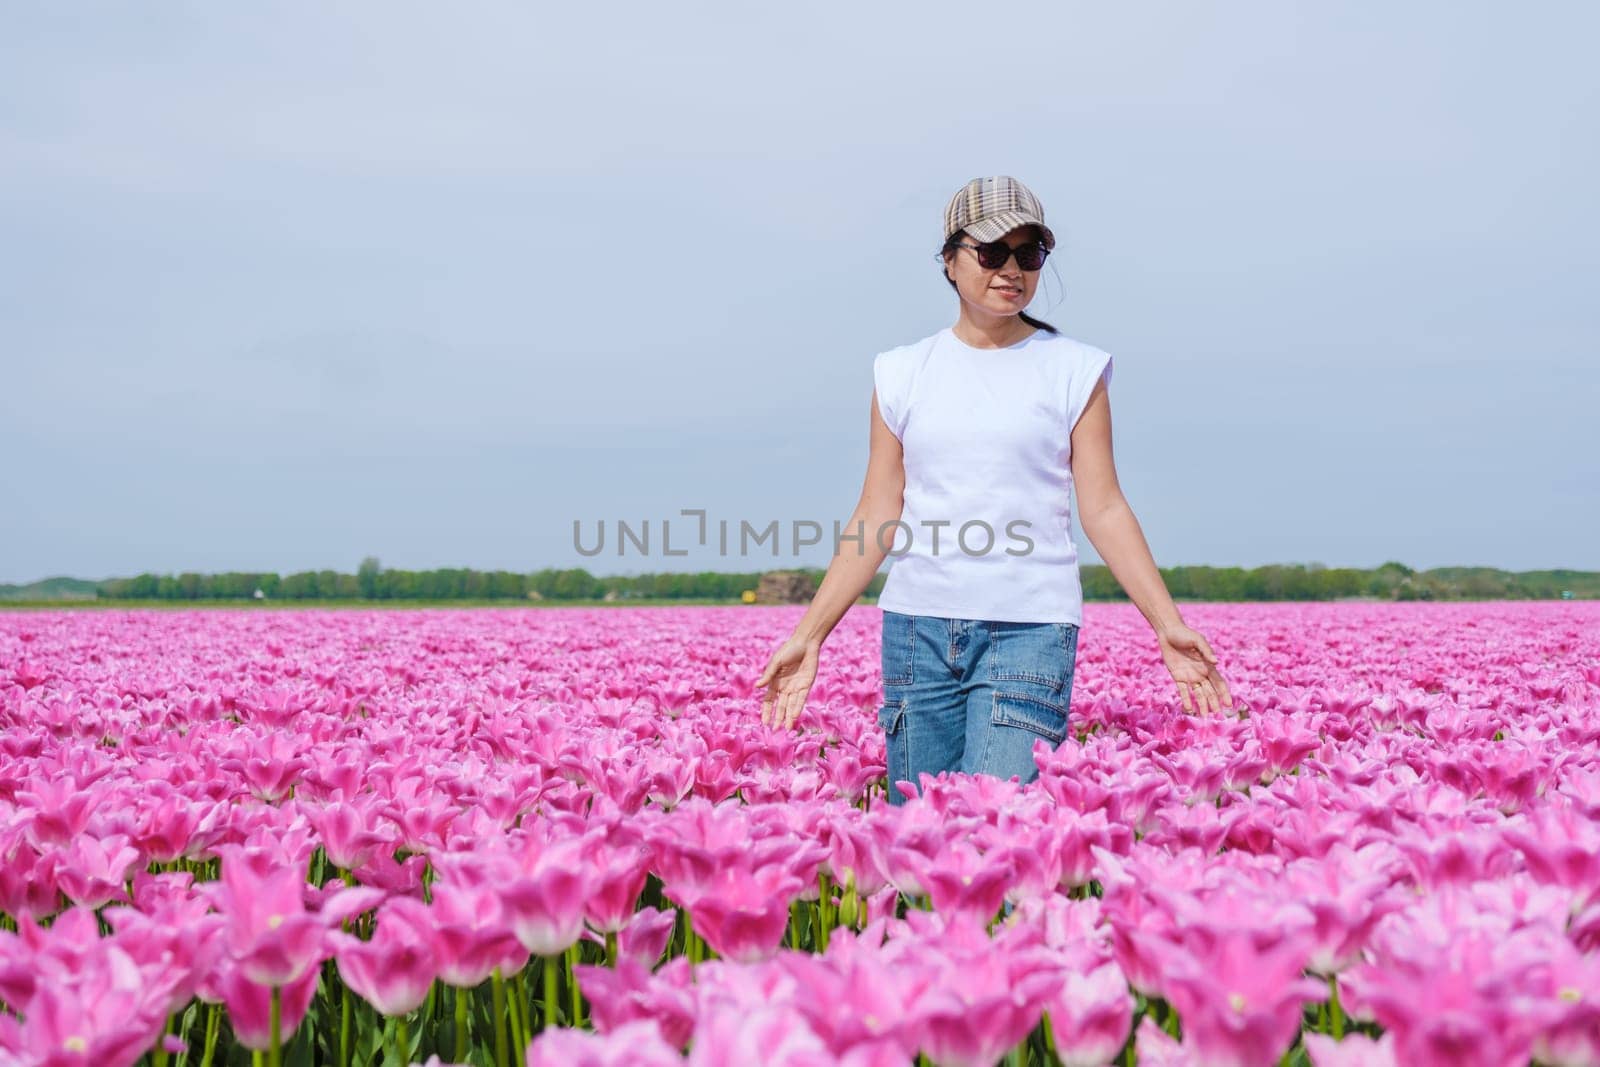 A woman stands in a field of vibrant pink tulips in Texel, Netherlands, surrounded by the beauty of nature by fokkebok